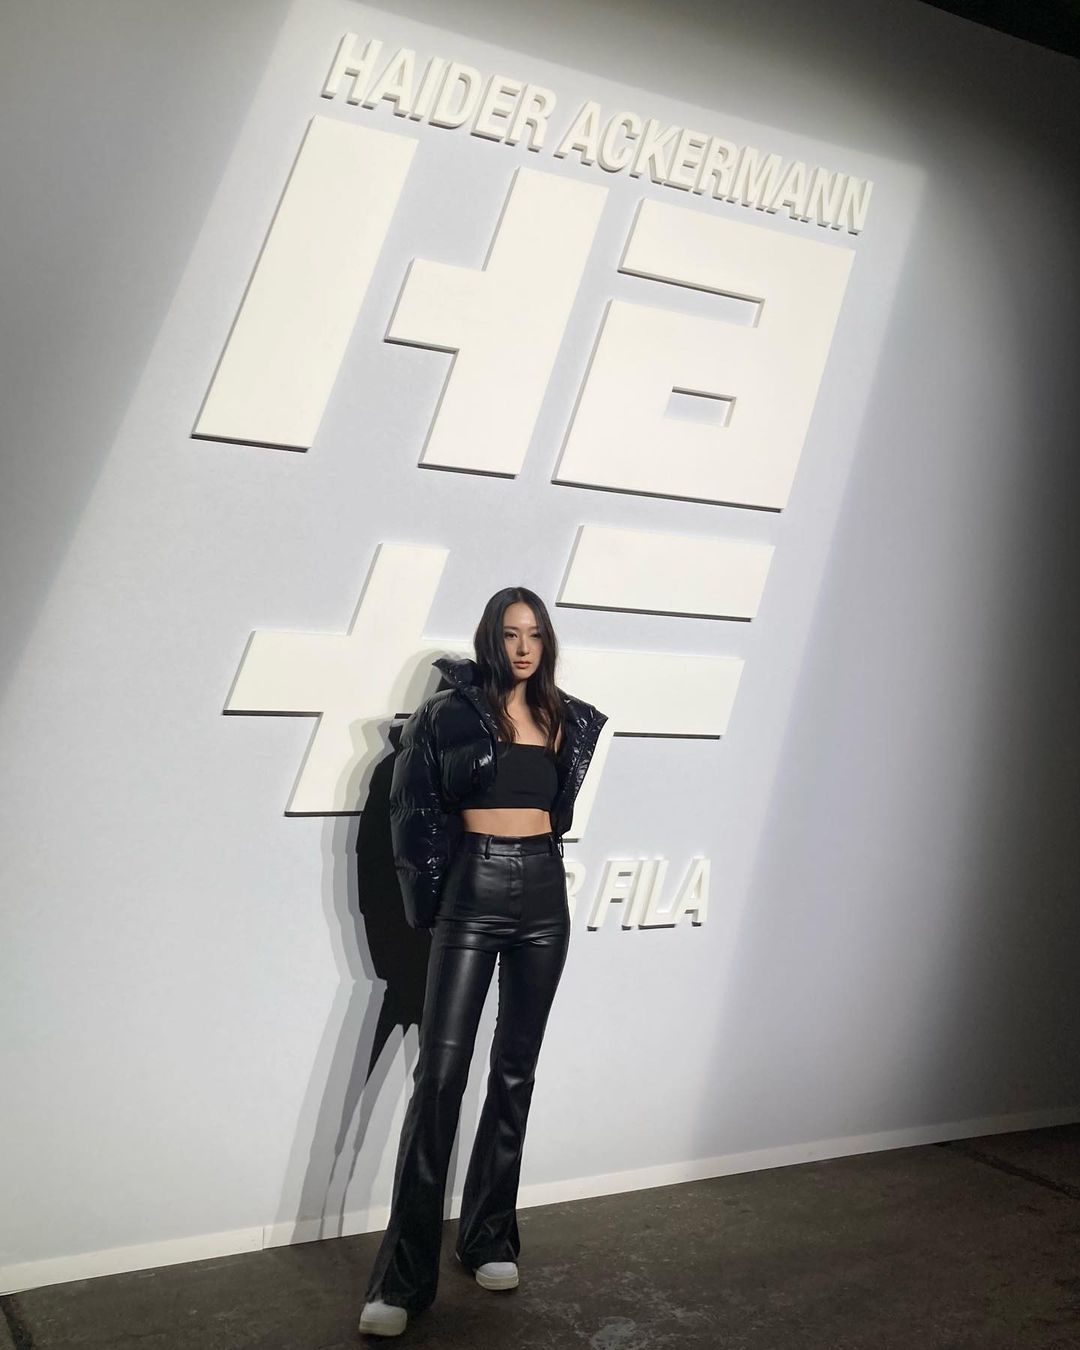 Krystal, exotic beauty... Sharp abs on top of leather pants